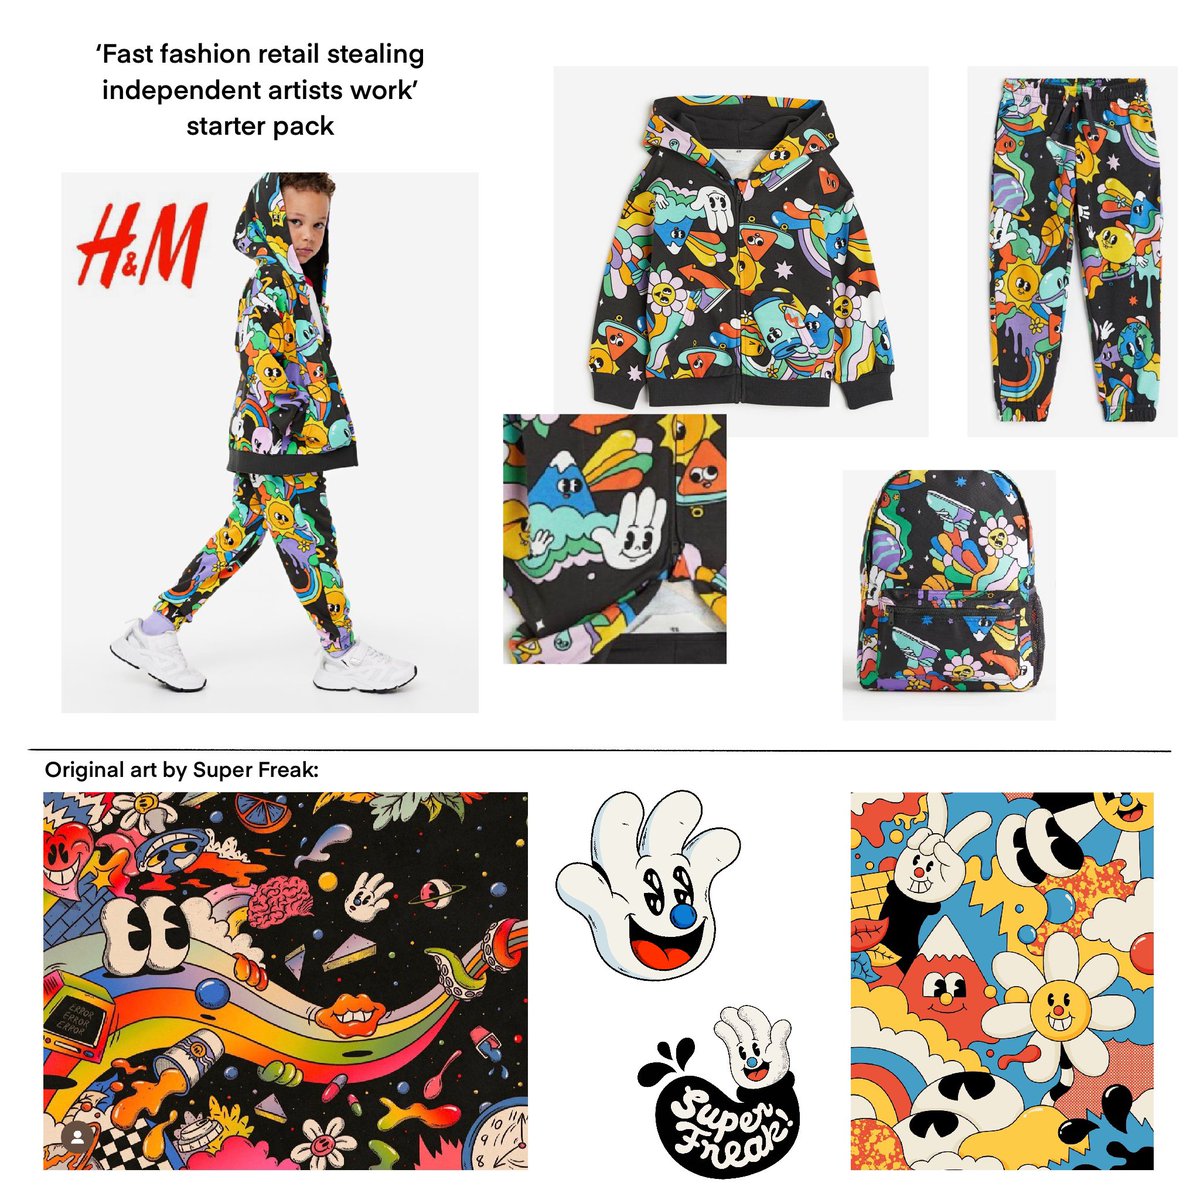 This is straight up theft @hm There’s a fine line when it comes to art and plagiarism but this is just WAY over said line 🤦‍♂️